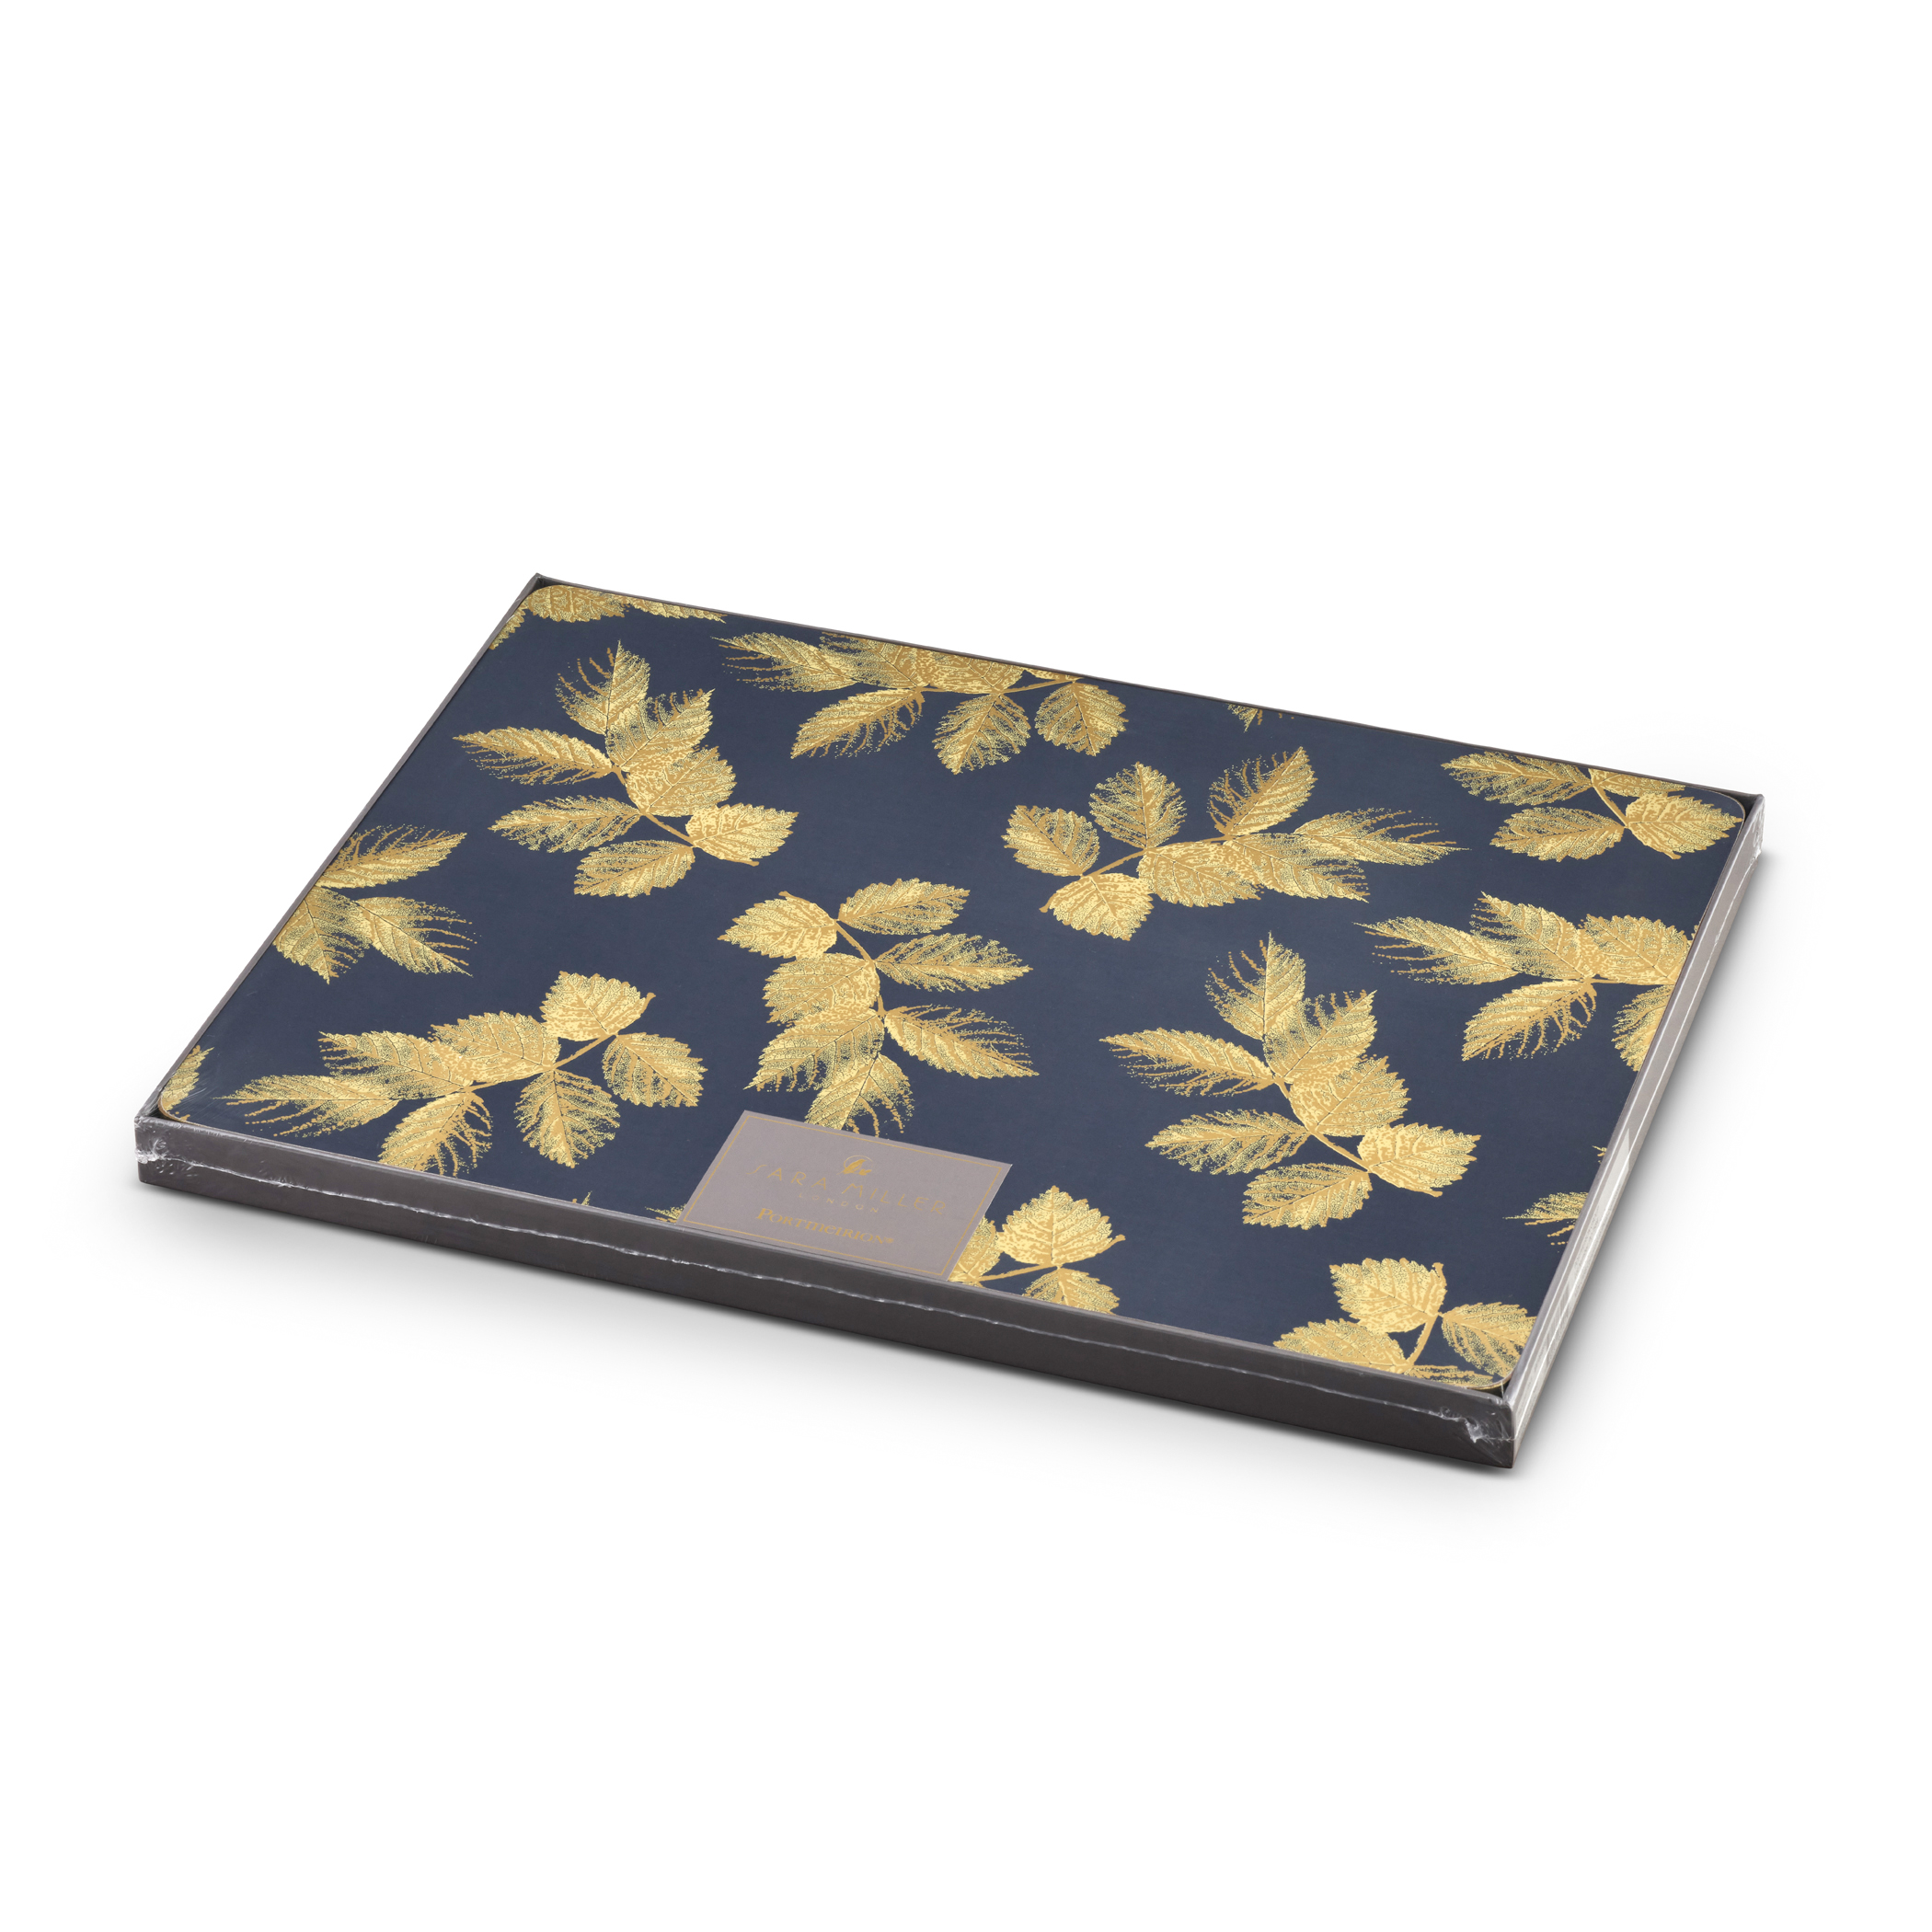 Sara Miller London Etched Leaves Placemats Set of 4 Navy - Large Size image number null